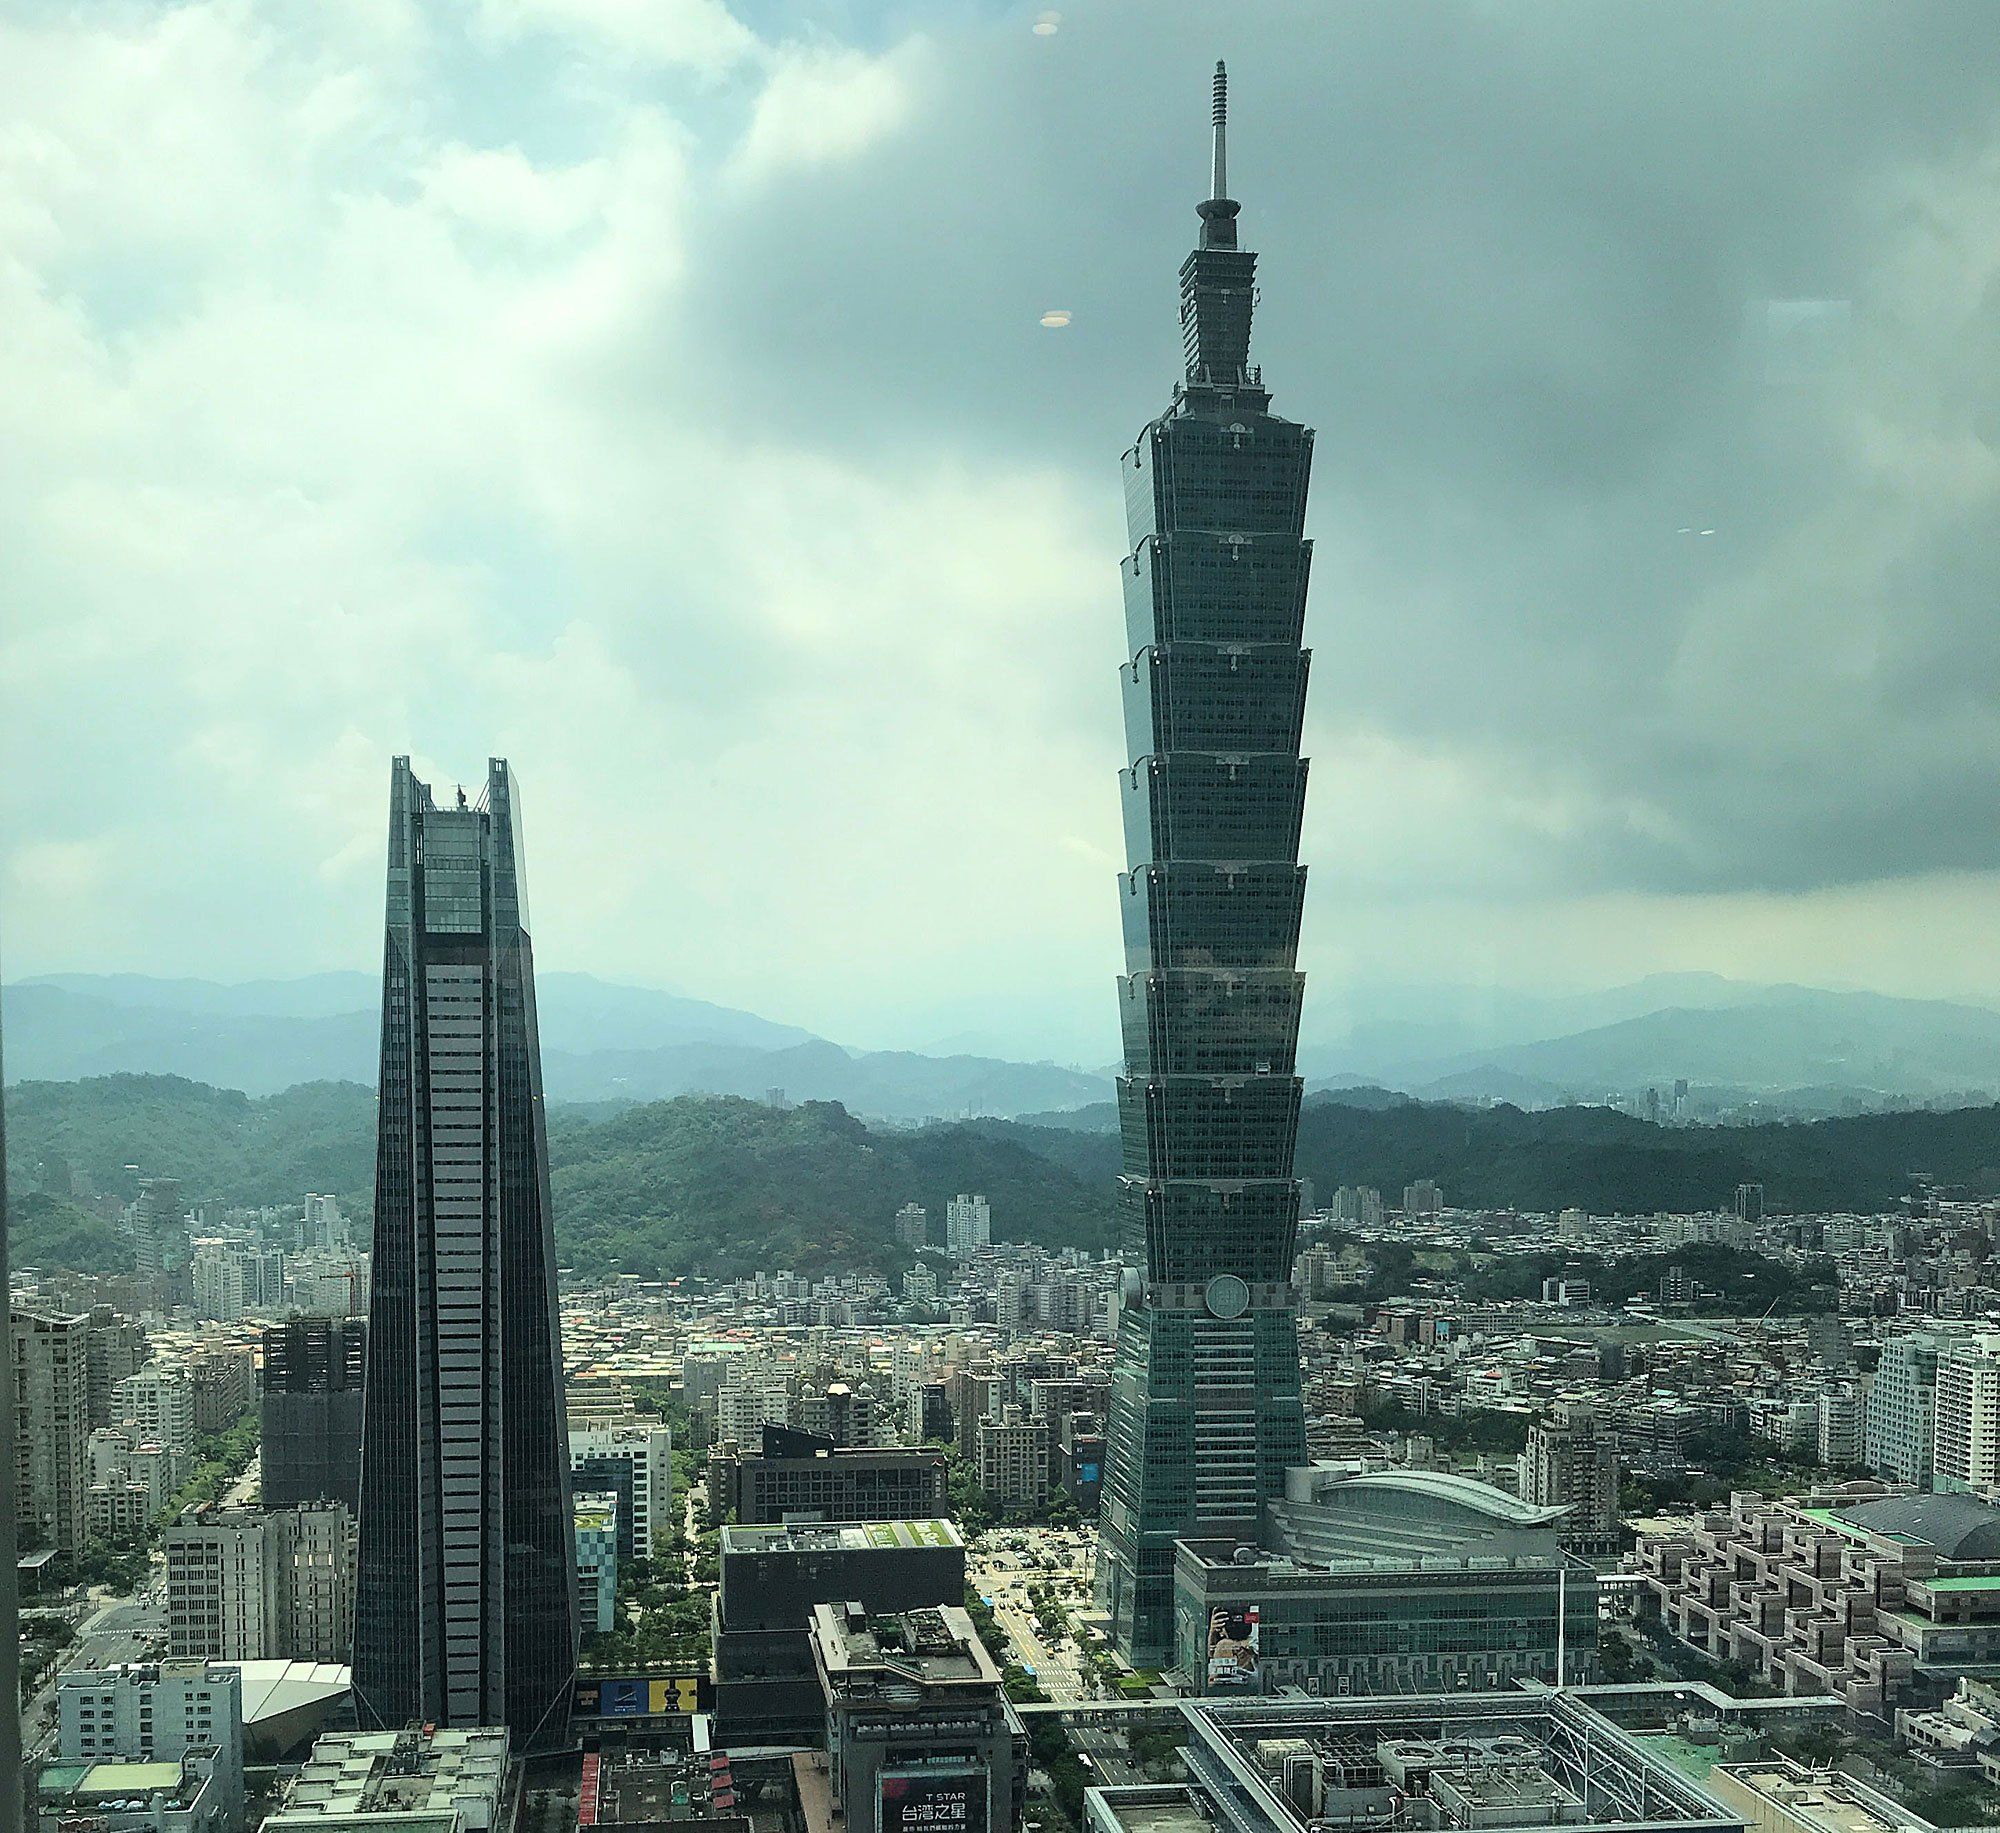 Taipei’s best-known landmark is this tall building (right), called Taipei 101. It was the world’s tallest building from 2004 to 2010. Image by Melissa McCart. Taiwan, 2018. 